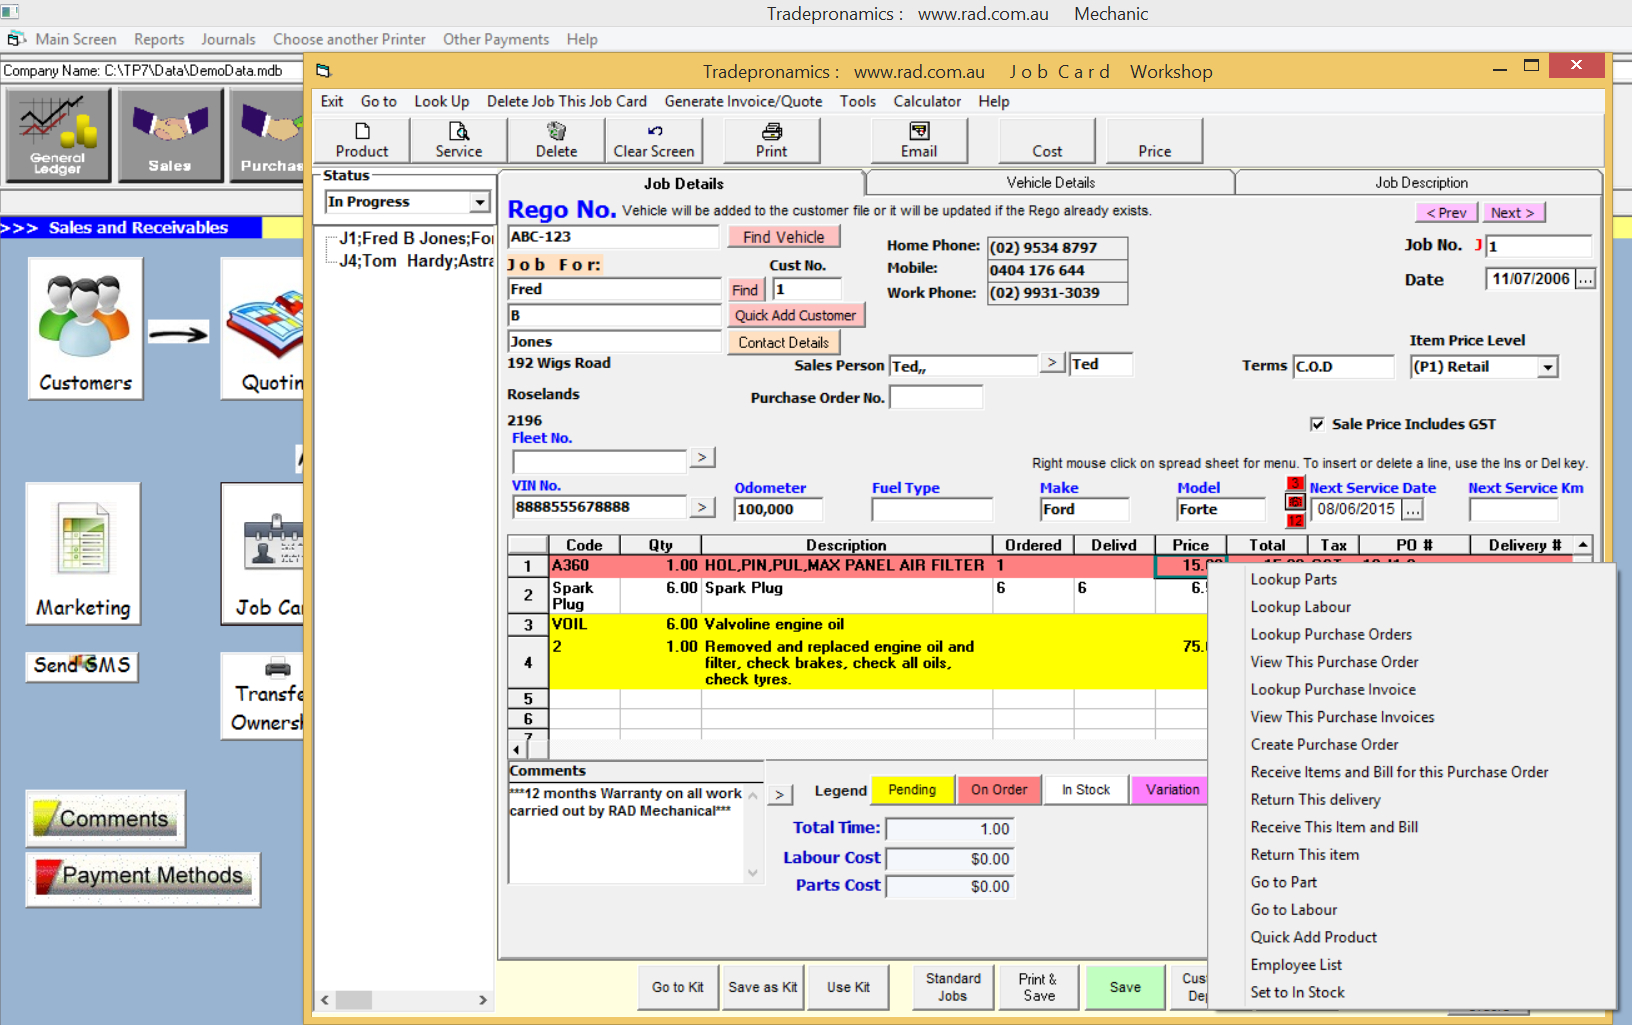 Auto Repair Invoice Software | Workshop Manager Software Throughout Mechanics Job Card Template